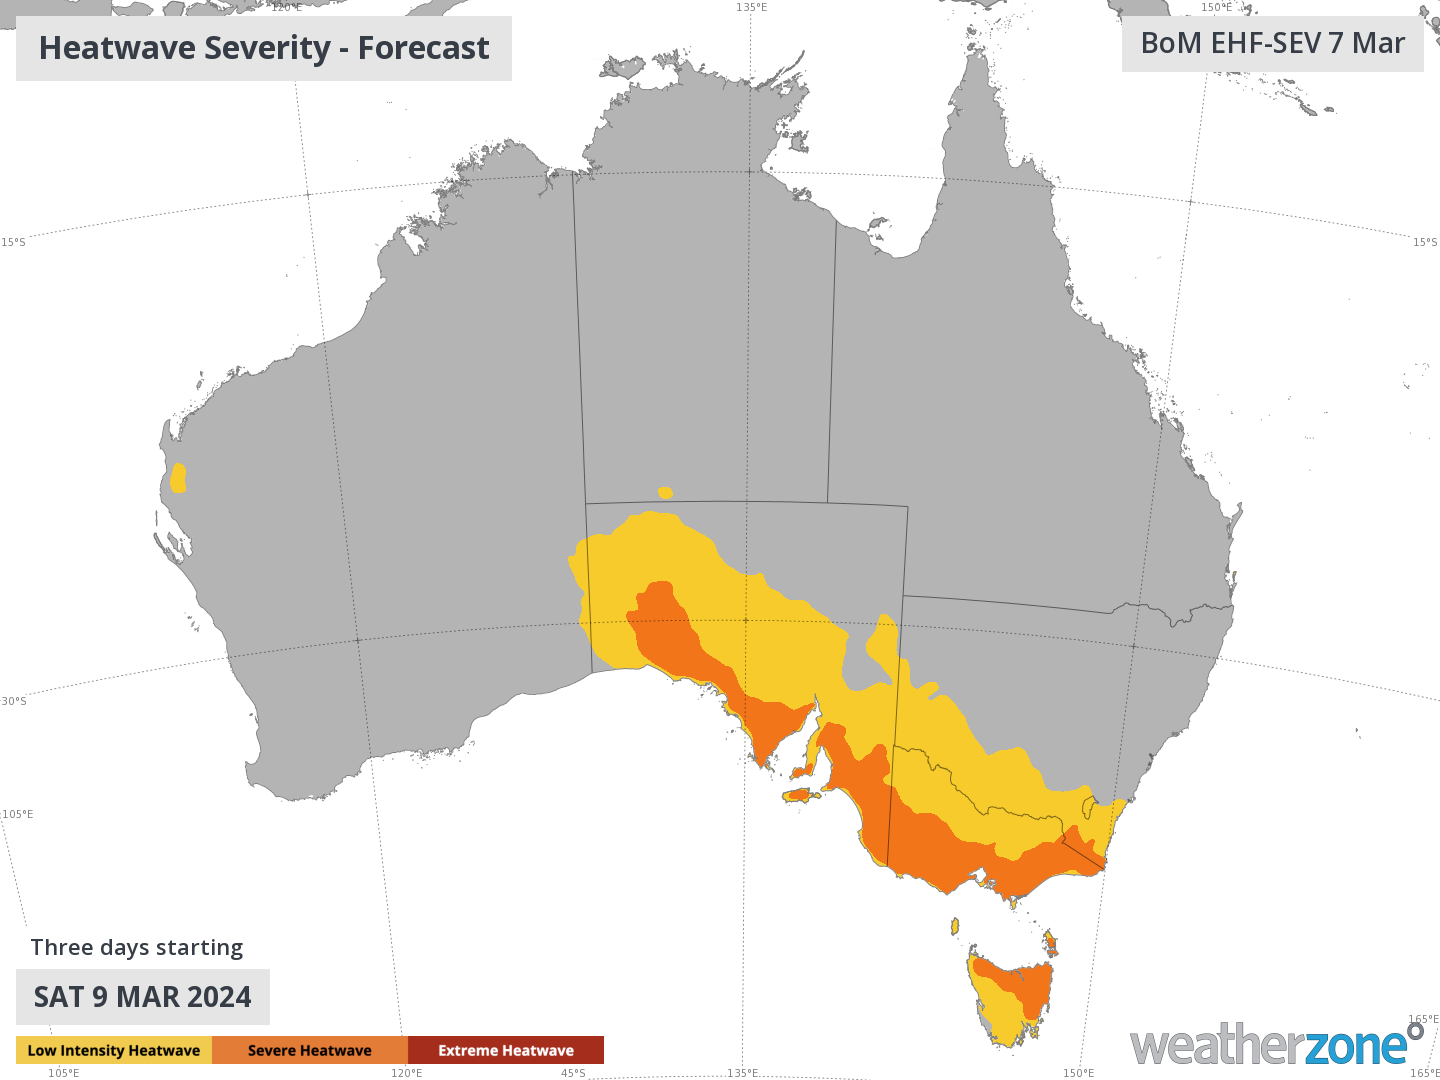 Forecast heatwave severity, showing severe condtions for SA, Vic and northeast Tas